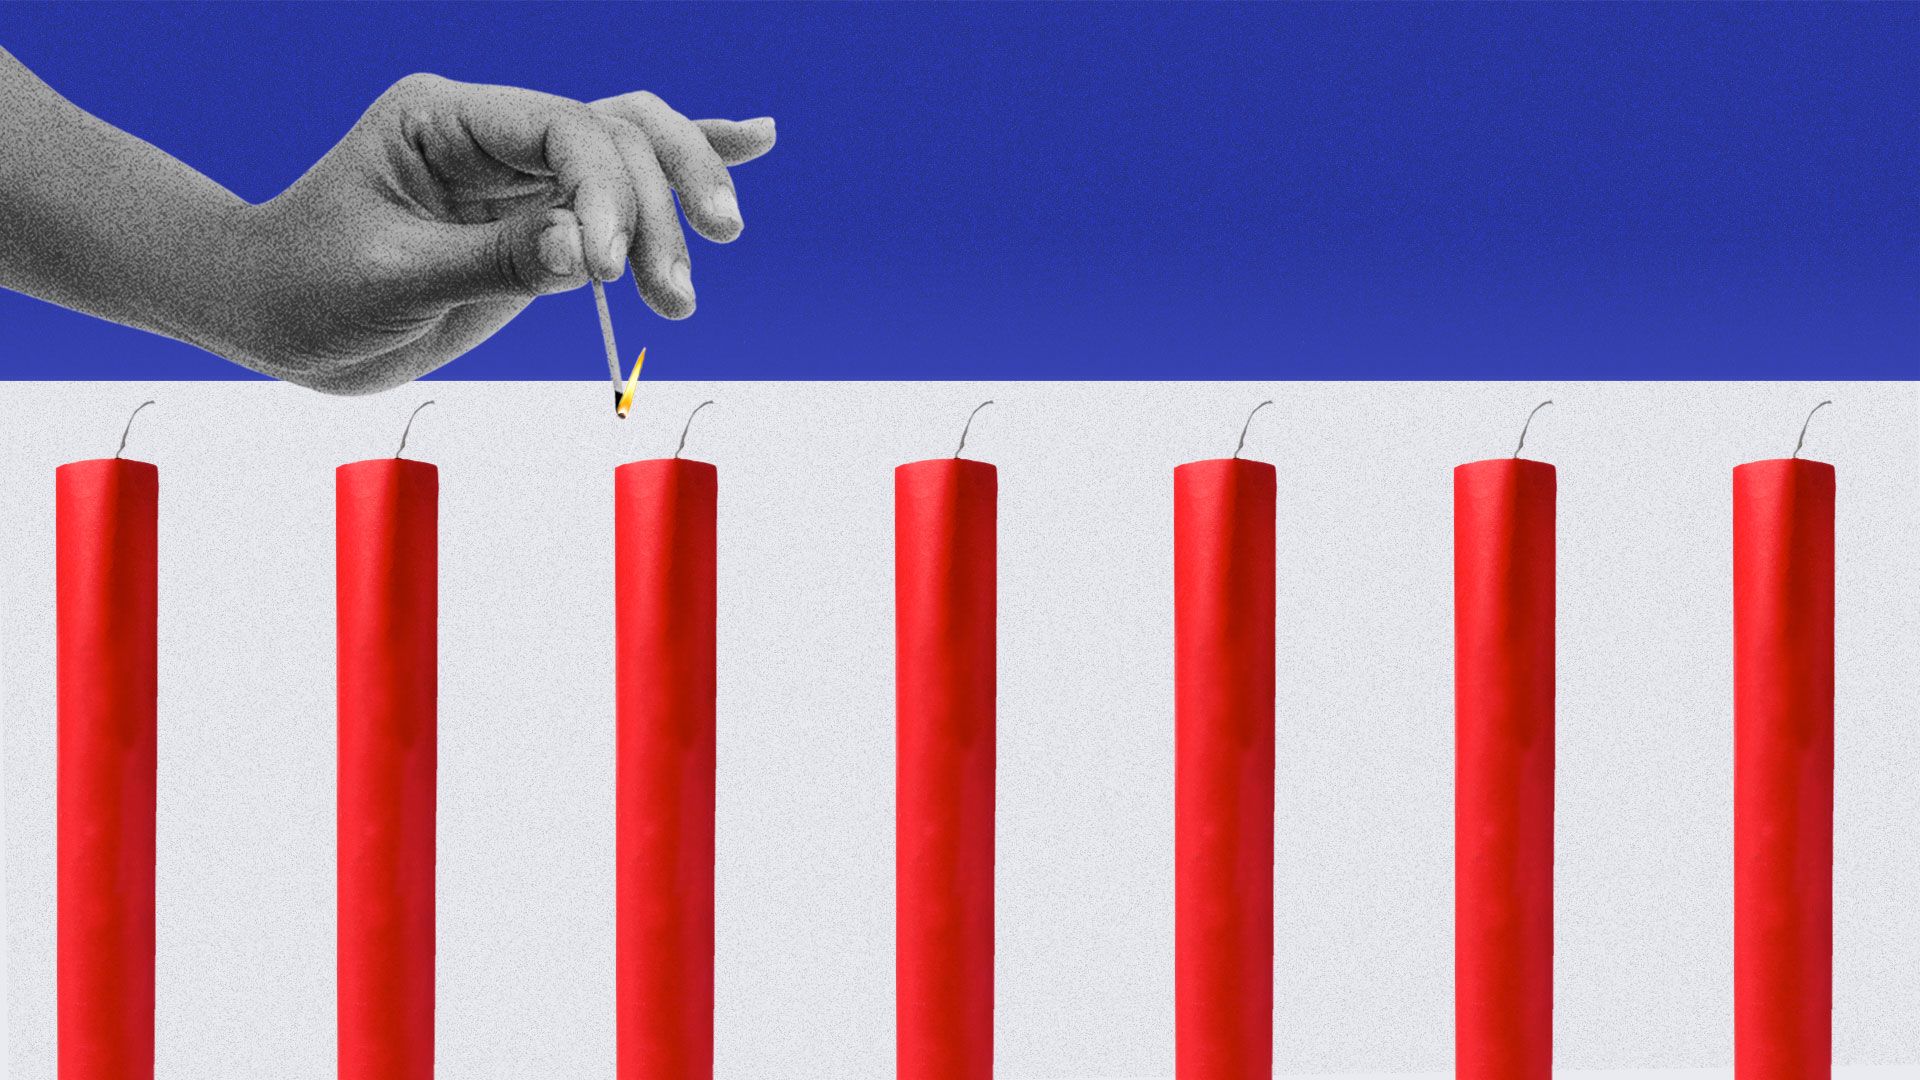 Illustration of red sticks of dynamite on a blue and white background about to be lit with a match.